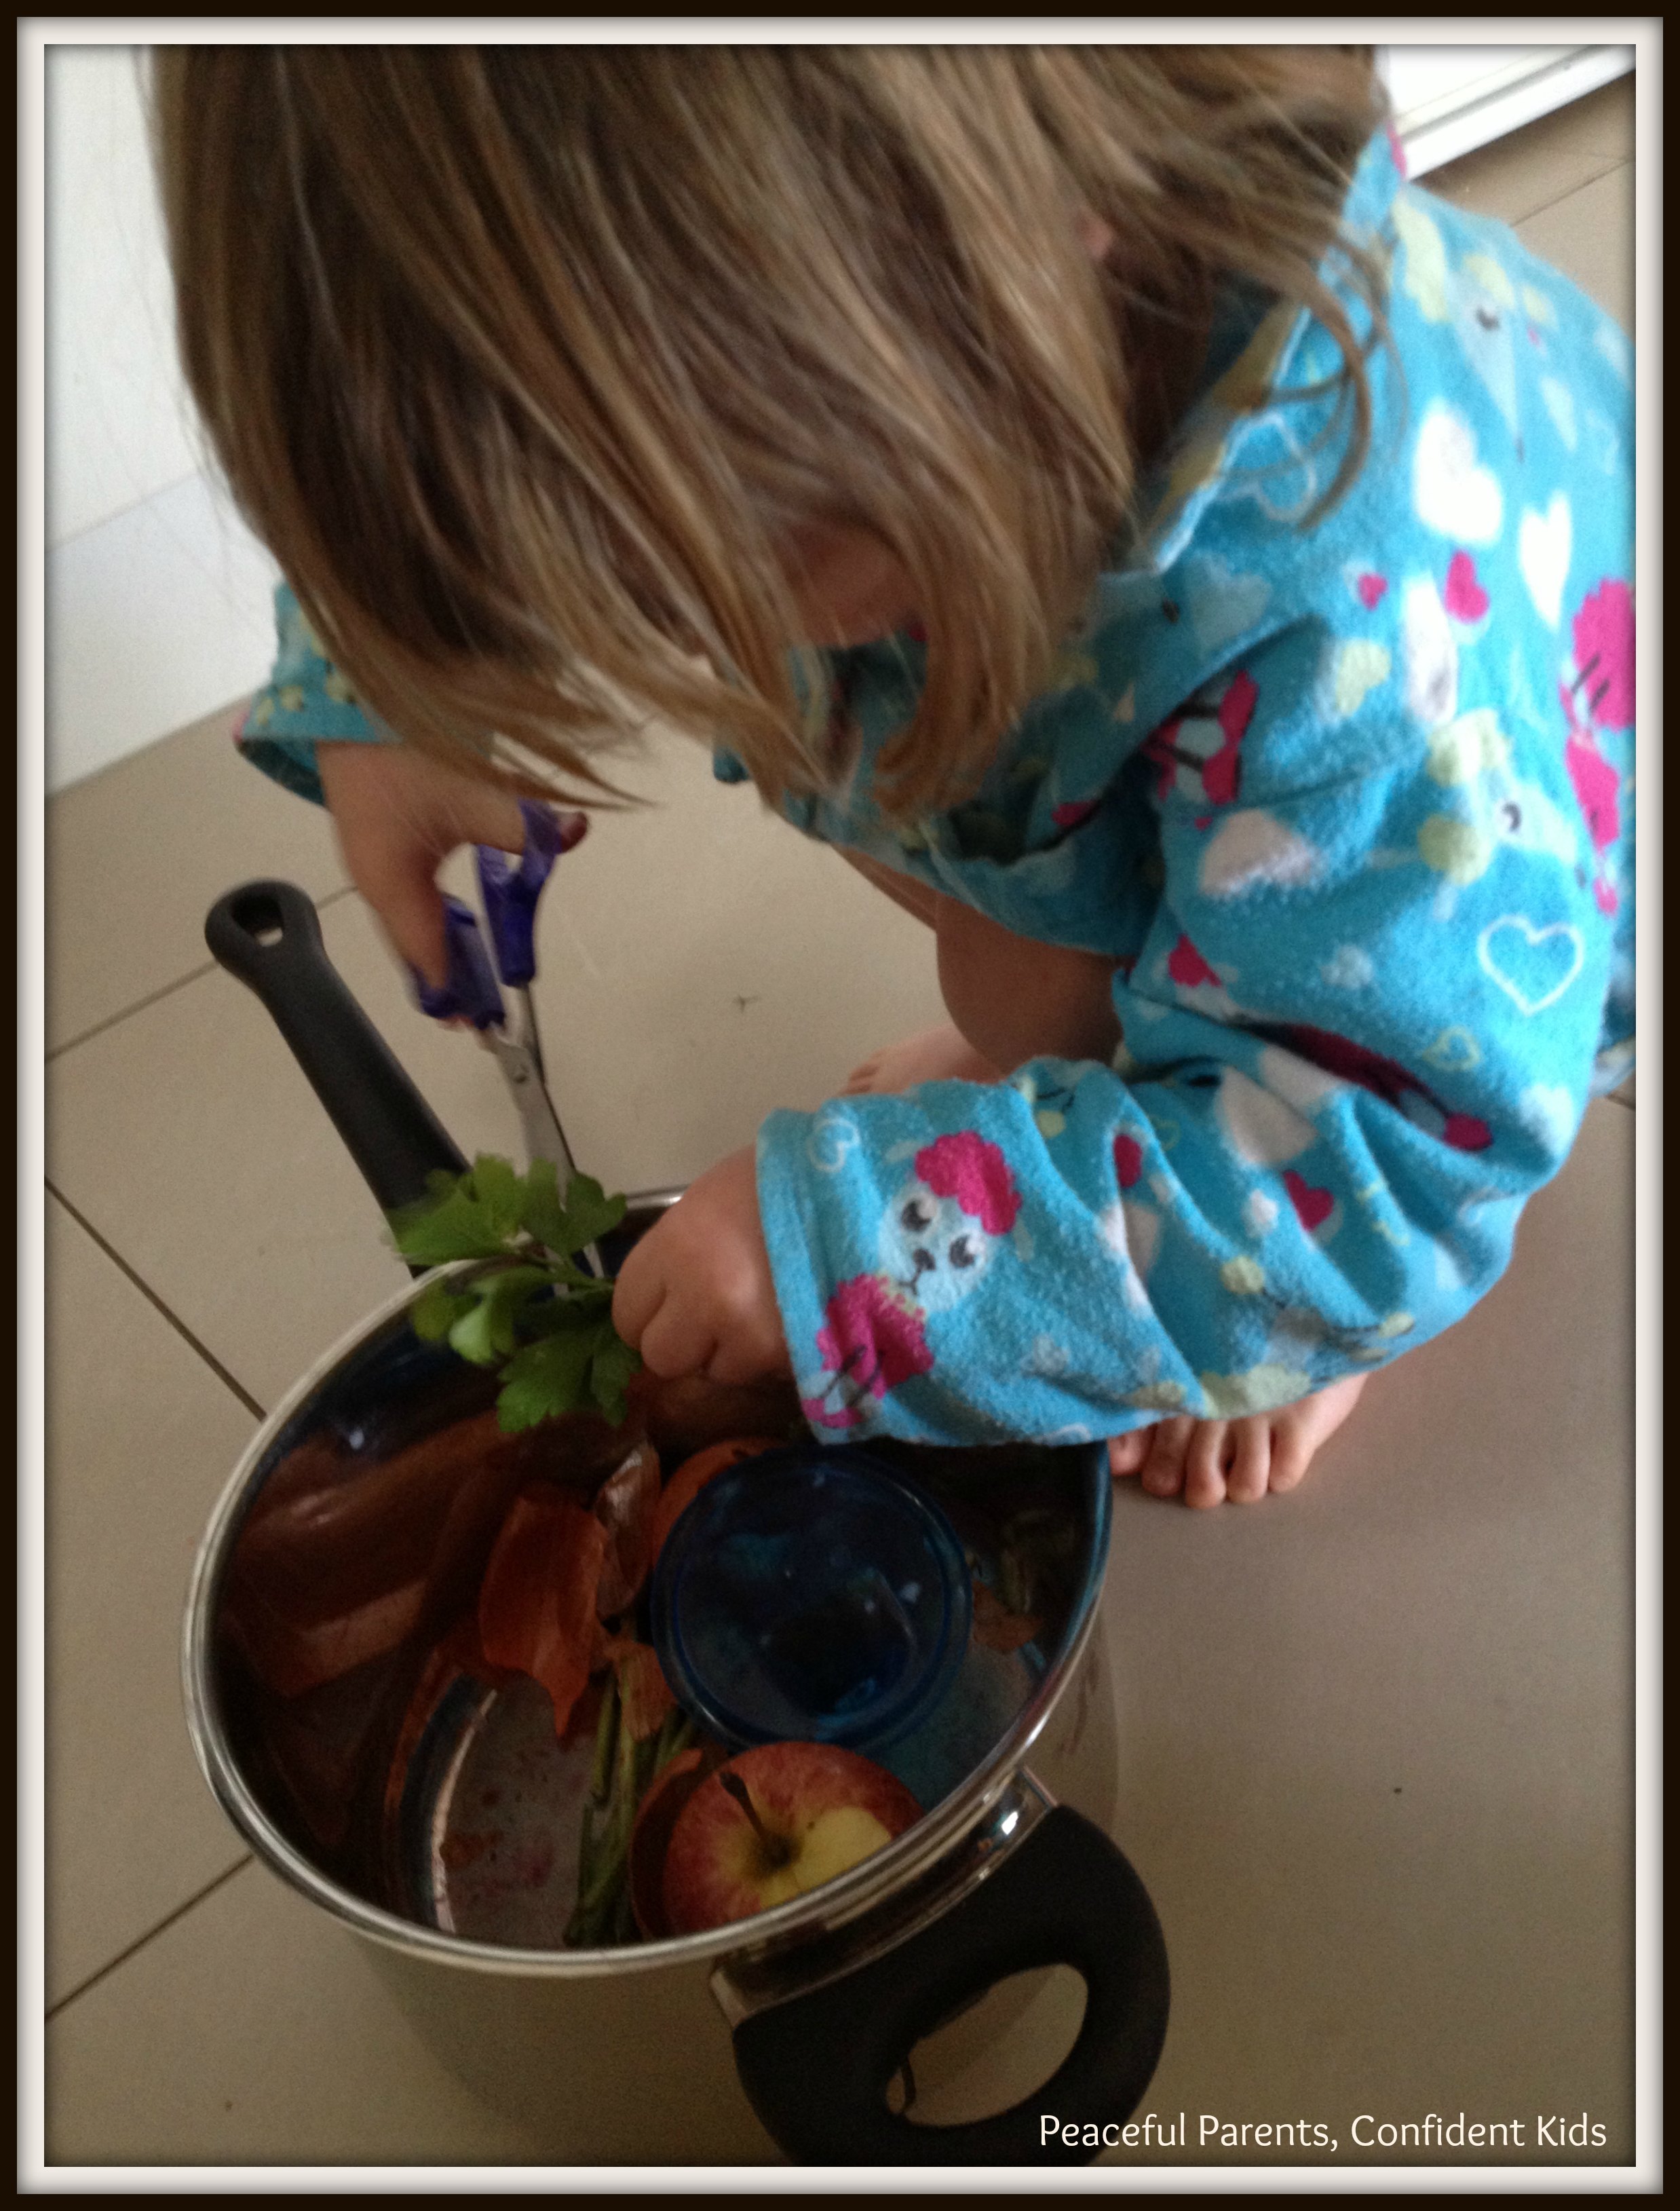 Finding a Peaceful Way to Prepare Dinner - Peaceful Parents, Confident Kids